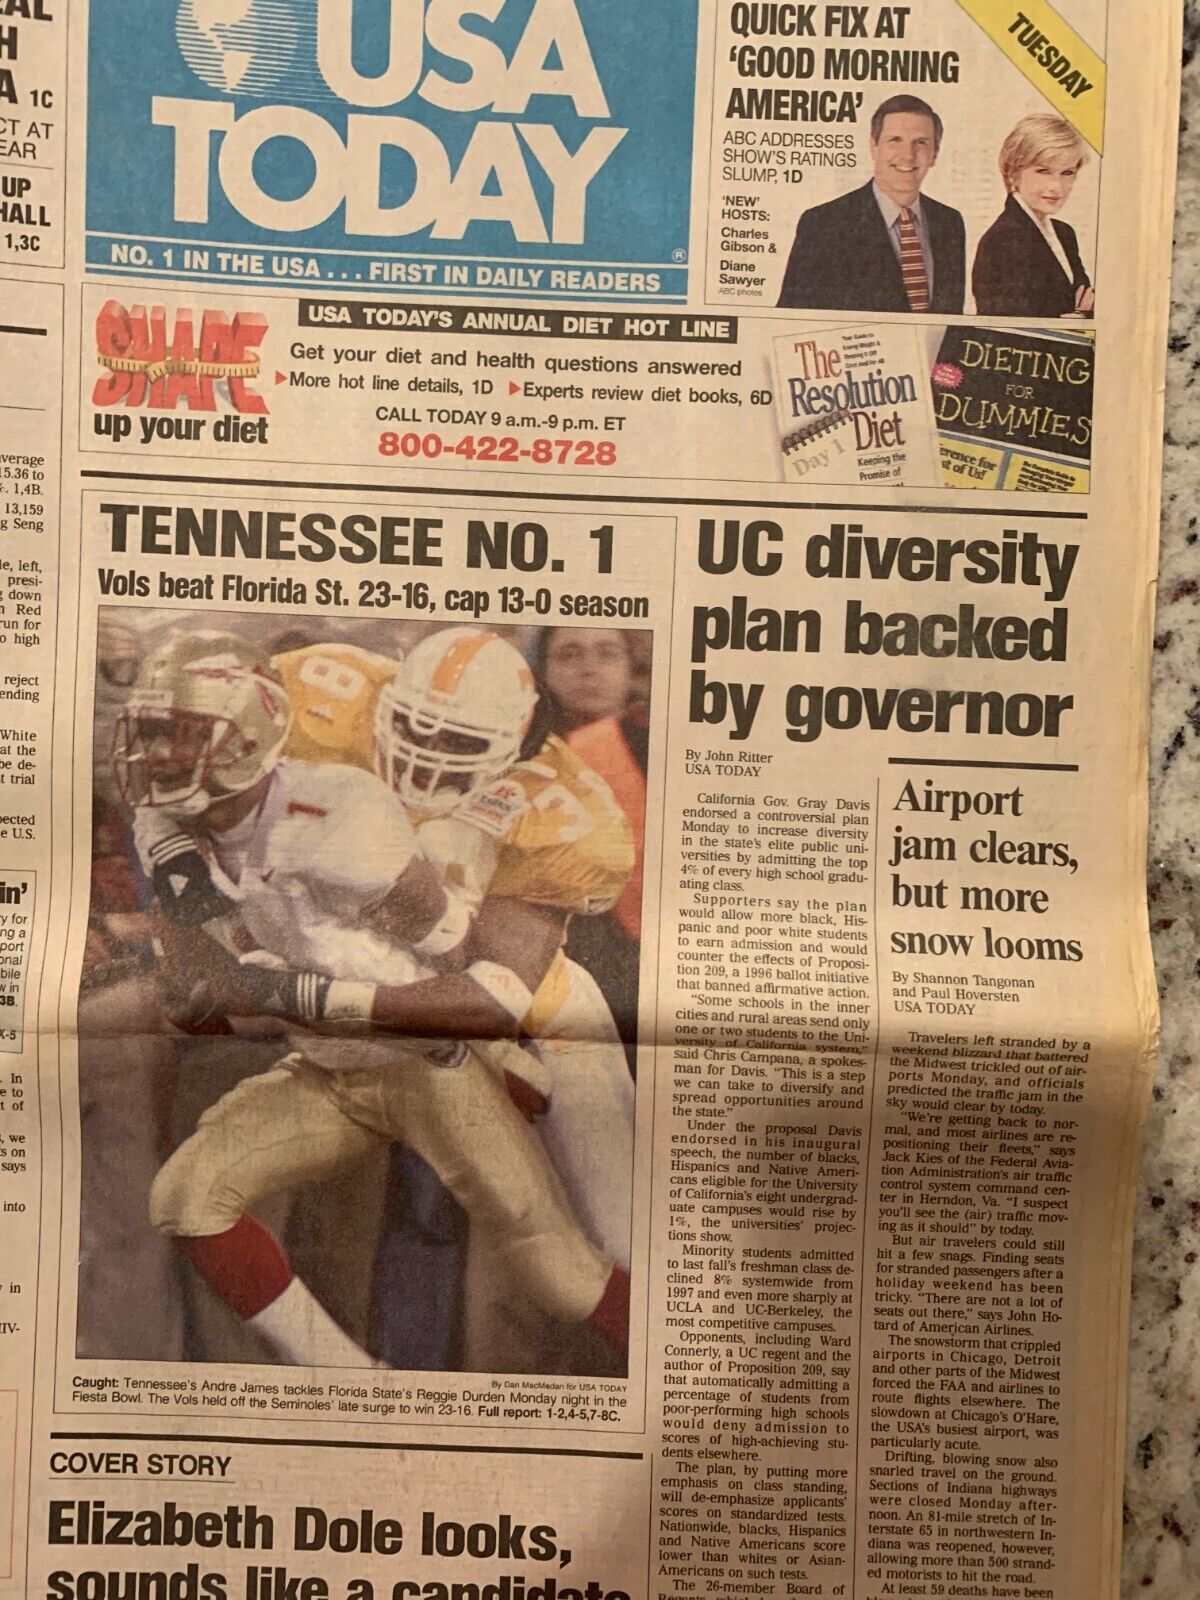 1998 Tennessee Volunteers National Football Champions - USA Today